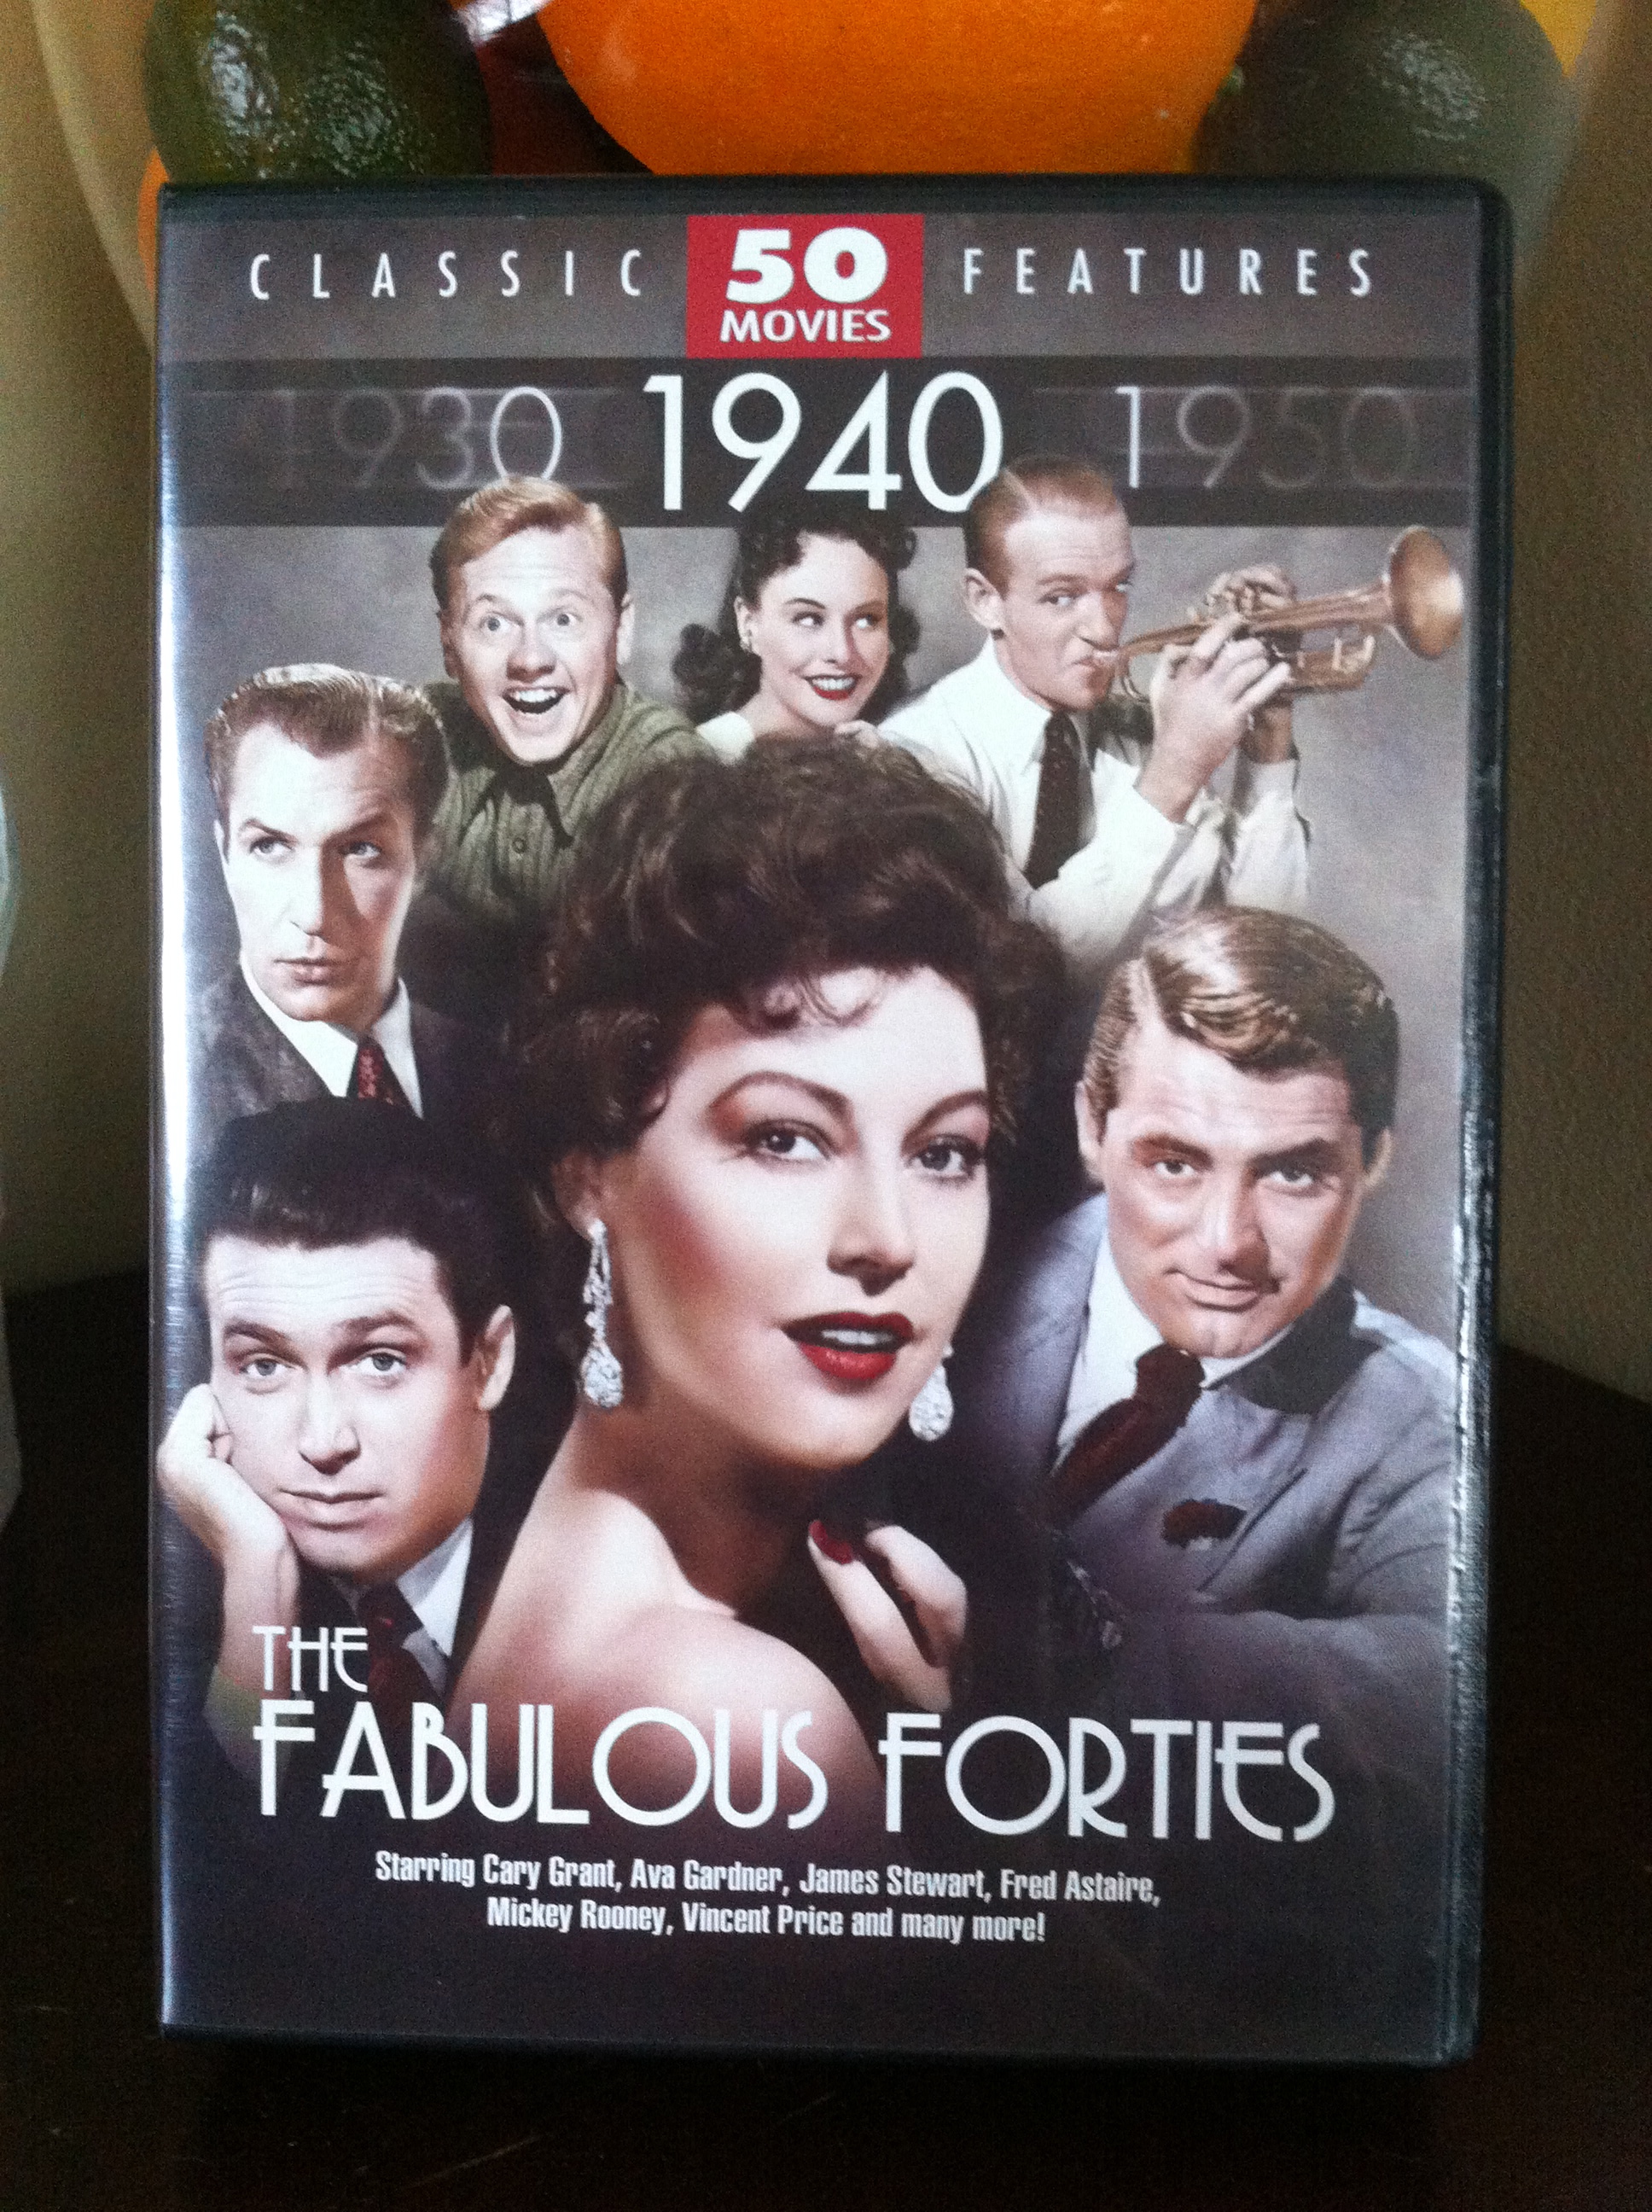 The Fabulous Forties